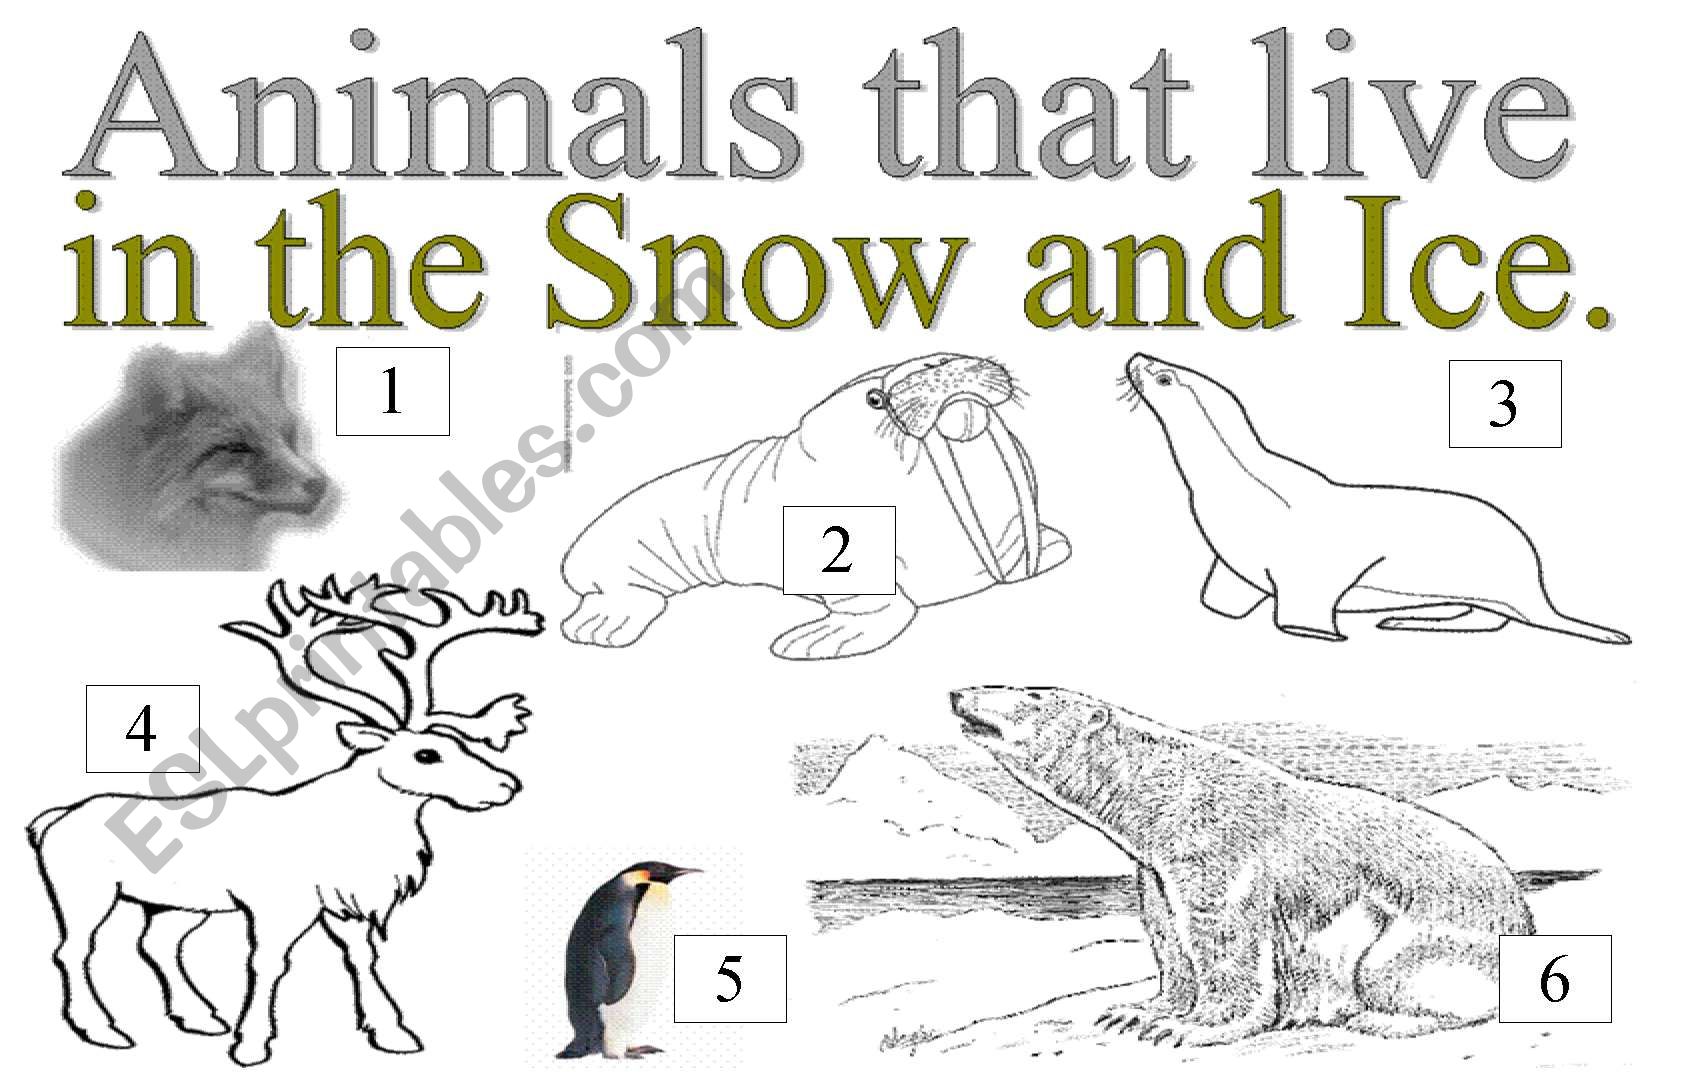 ANIMALS THAT LIVE IN THE SNOW AND ICE